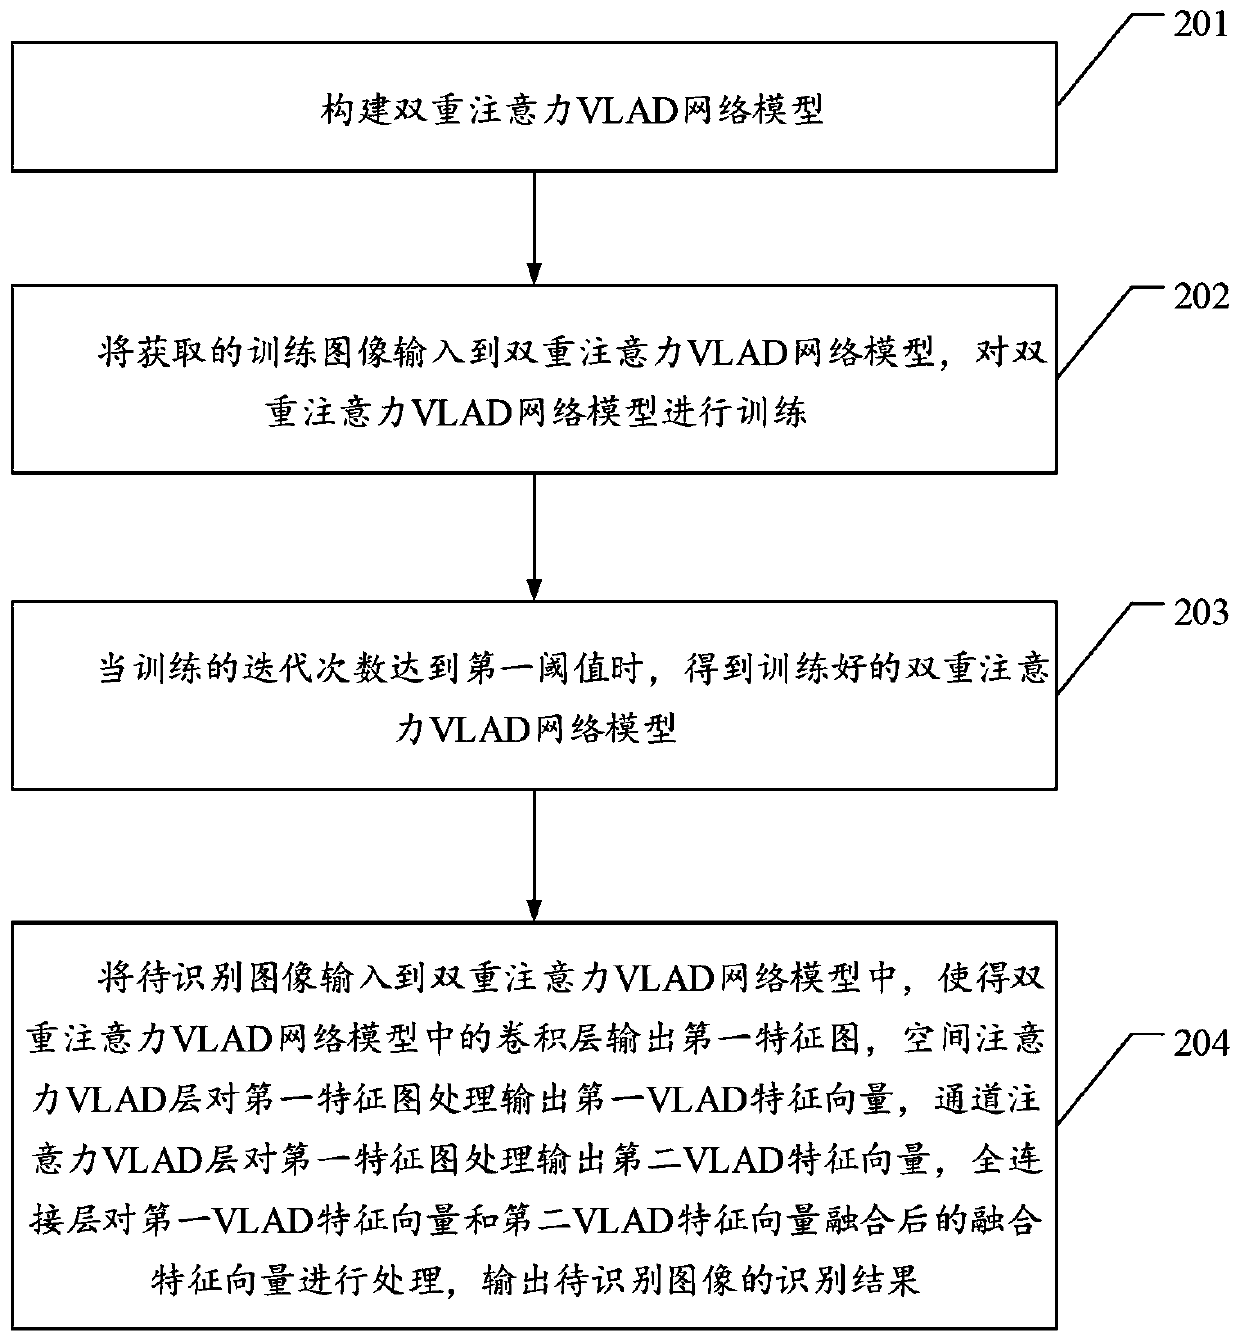 Image recognition method based on double attention